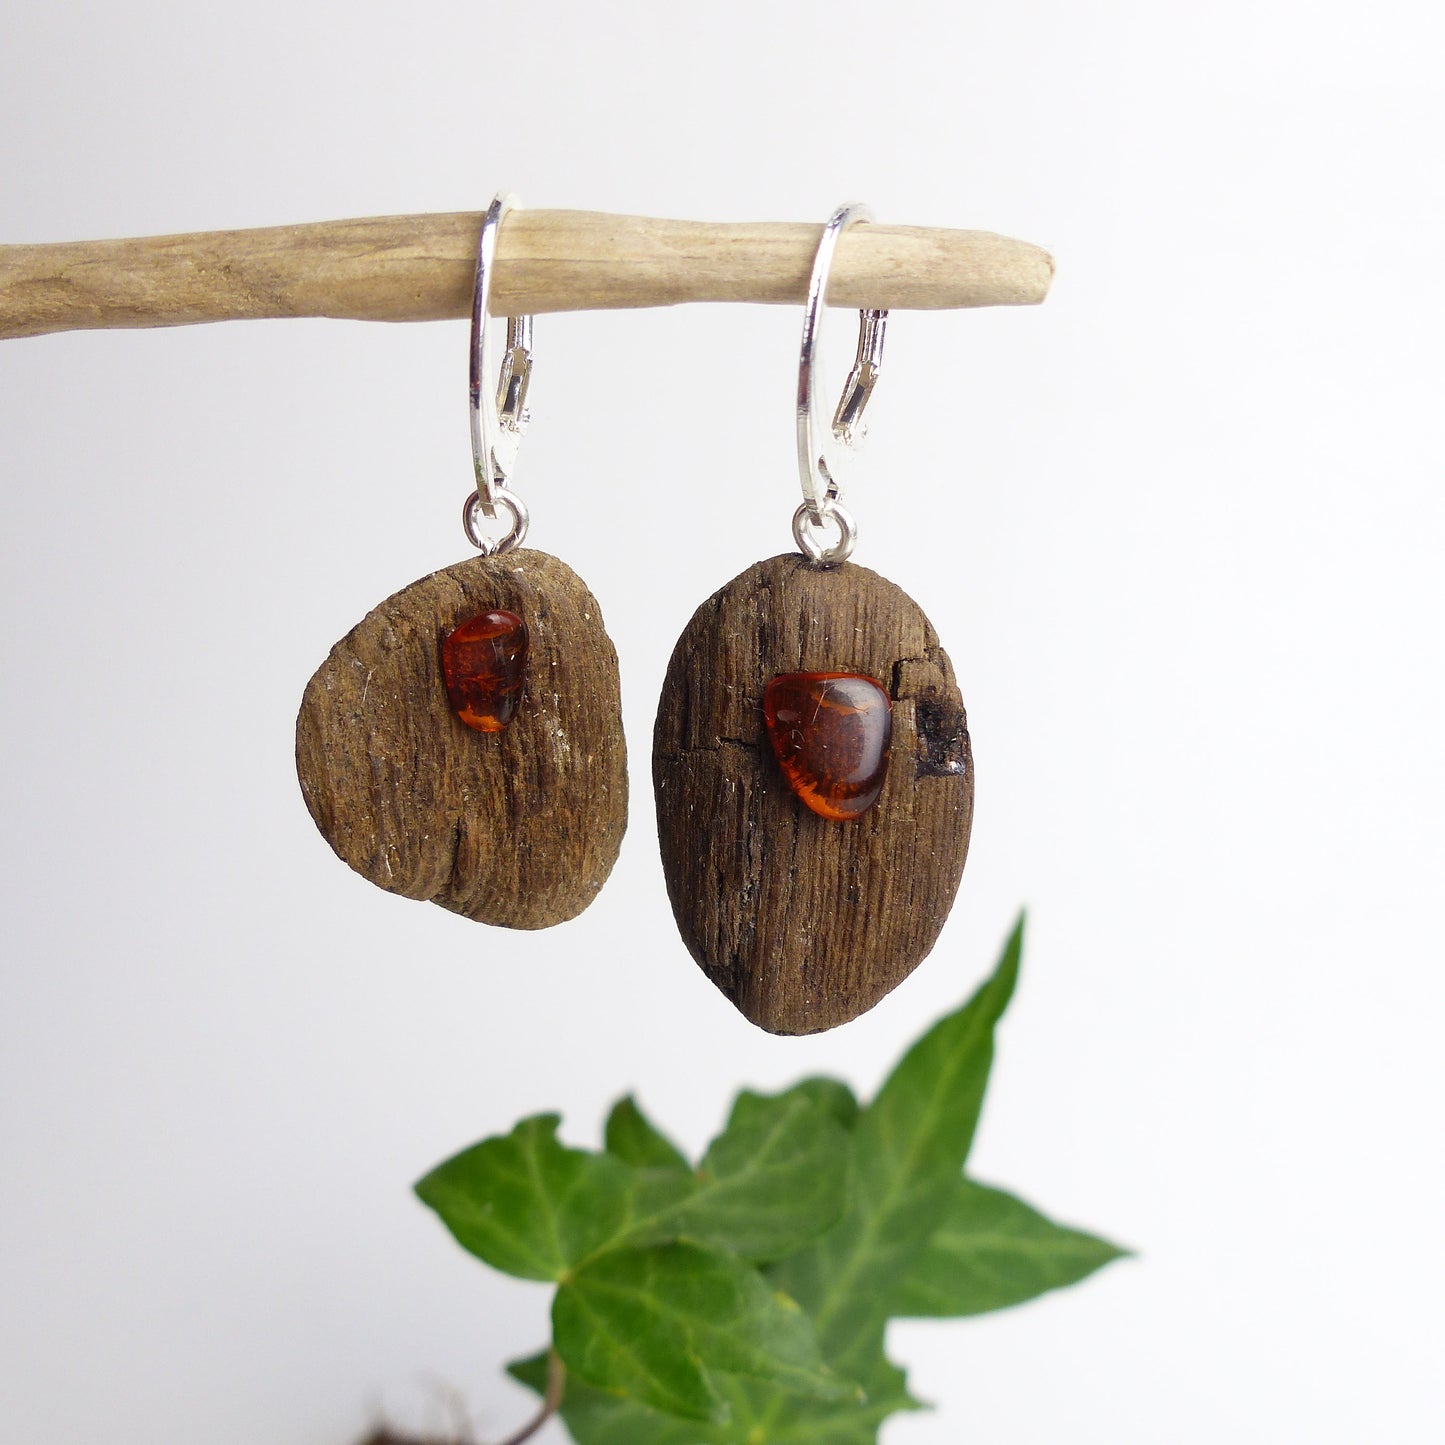 Driftwood Earrings SUURI with Amber and 925 Silver, handmade eco friendly gift